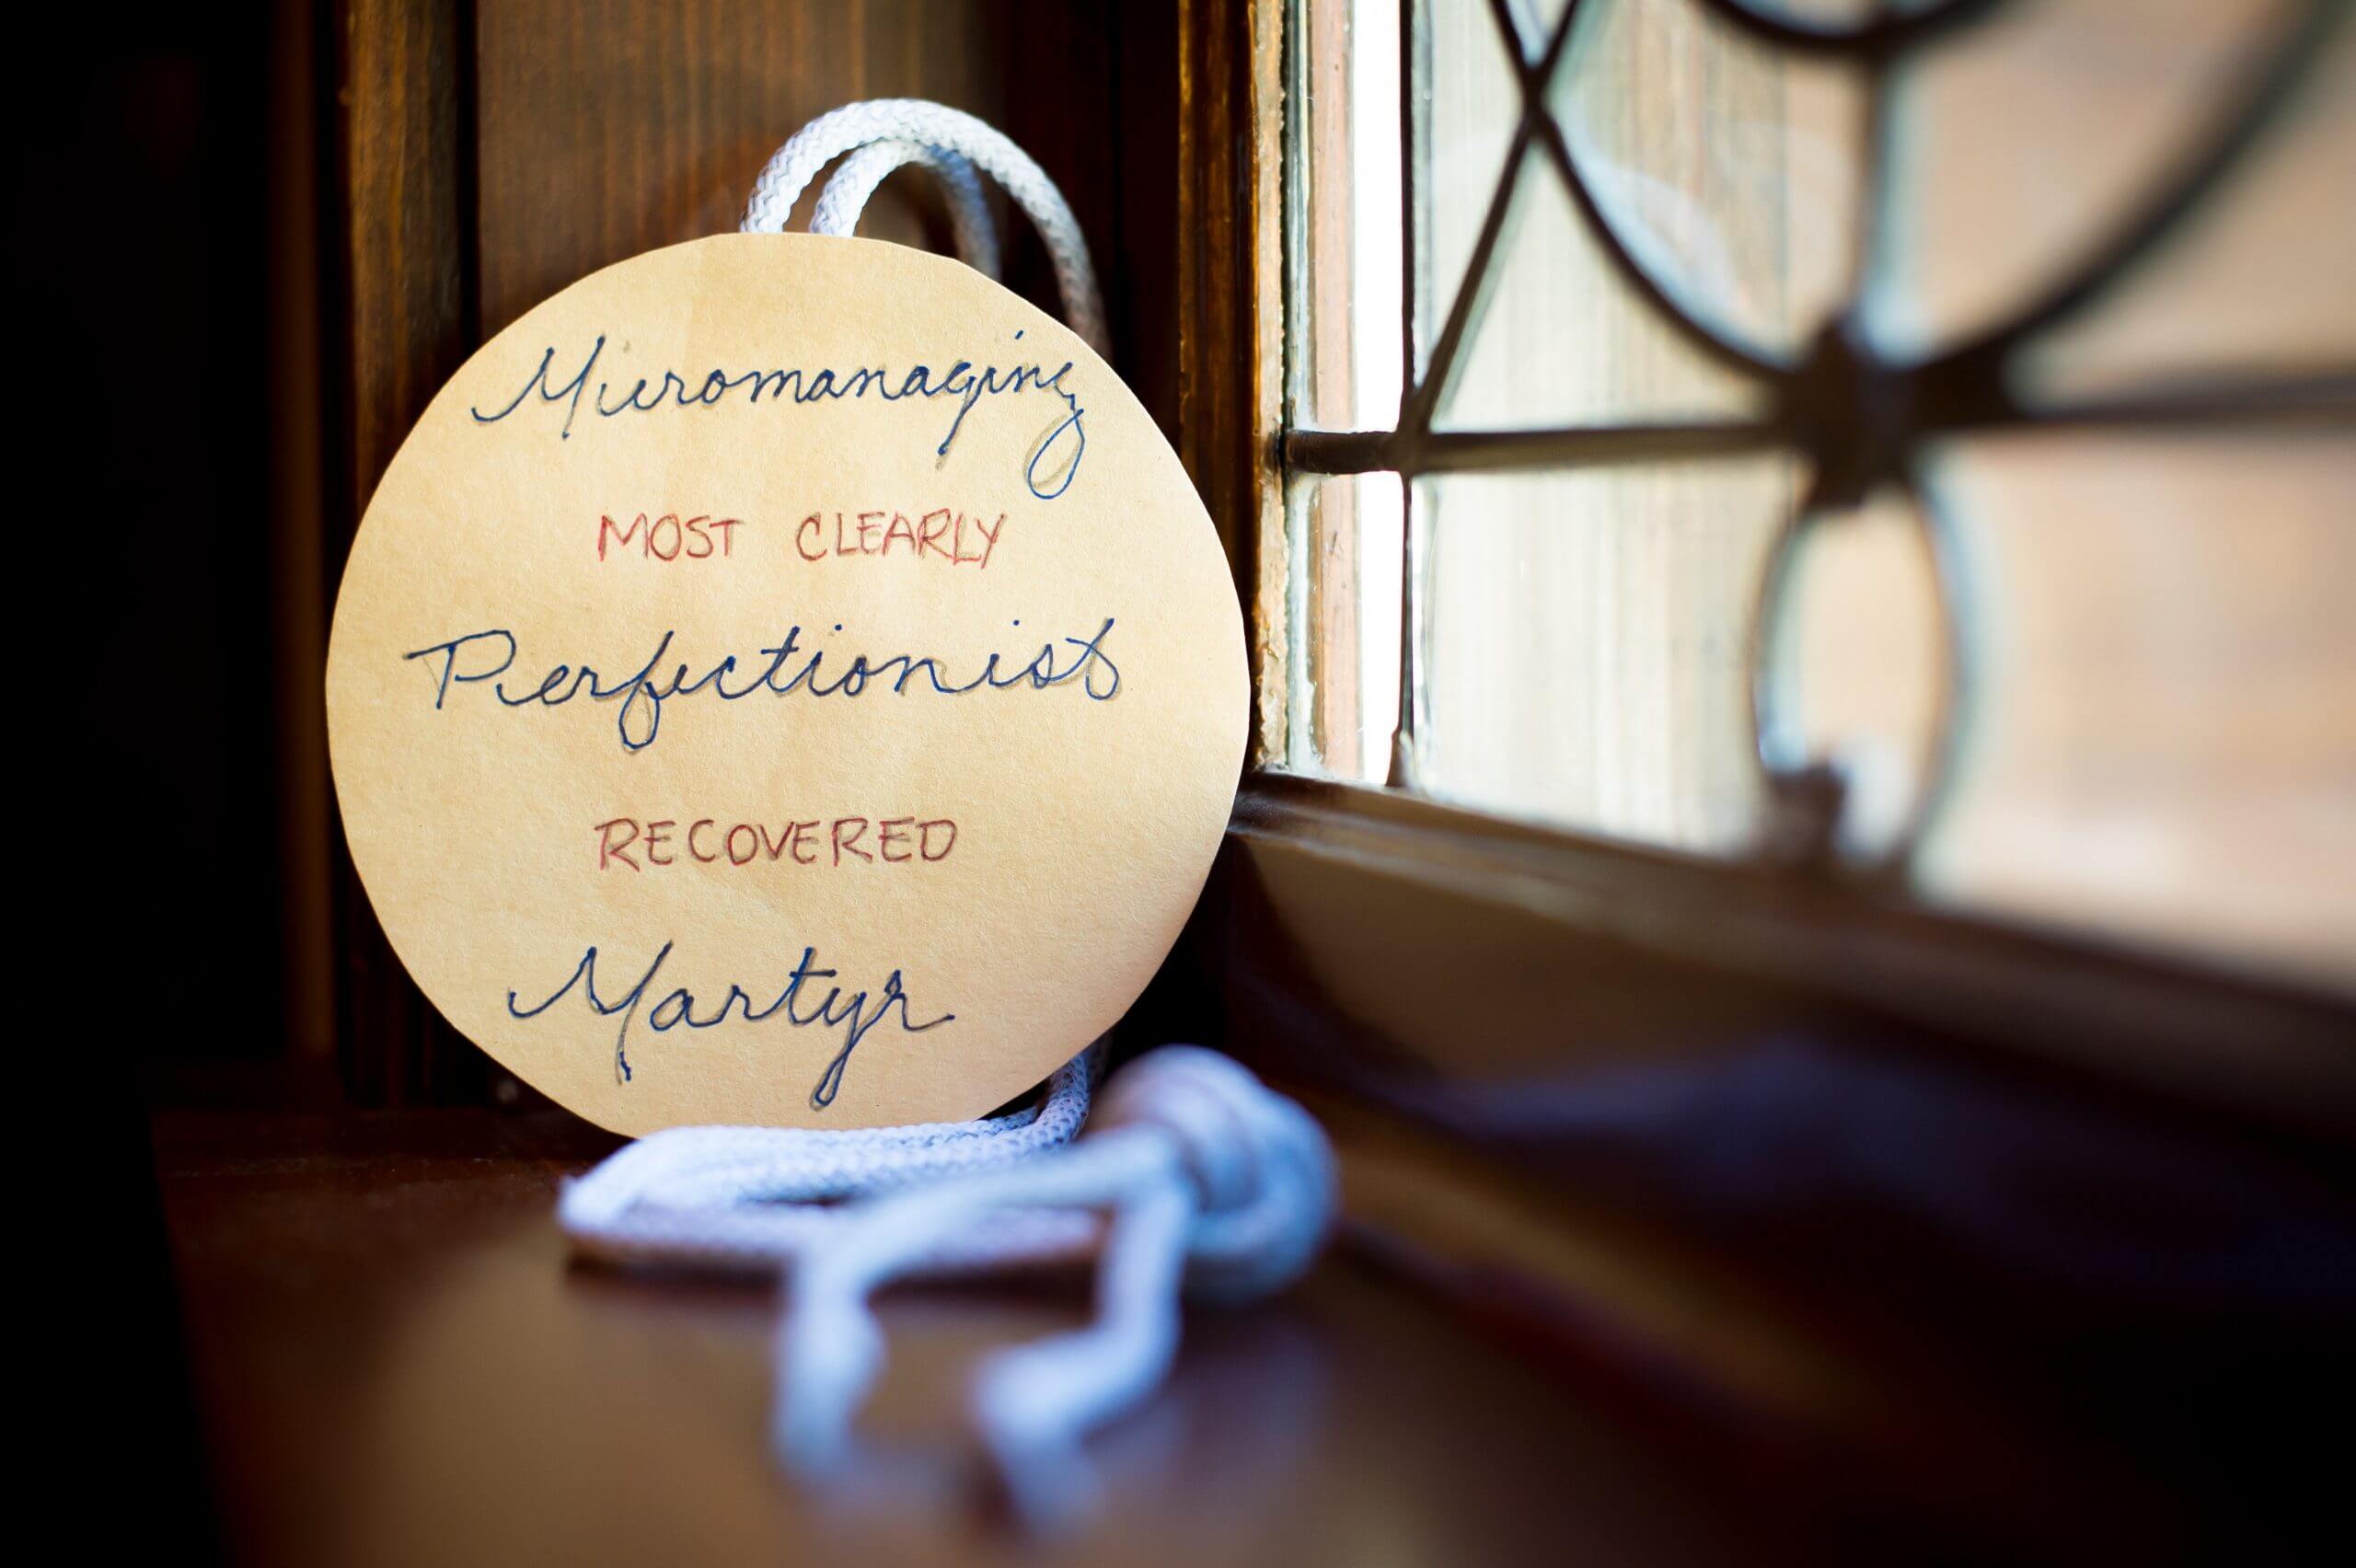 A focused view of an award with an unfocused view of a knotted rope behind it. The award reads "Most Clearly Recovered. Micromanaging, Perfectionist, Martyr."